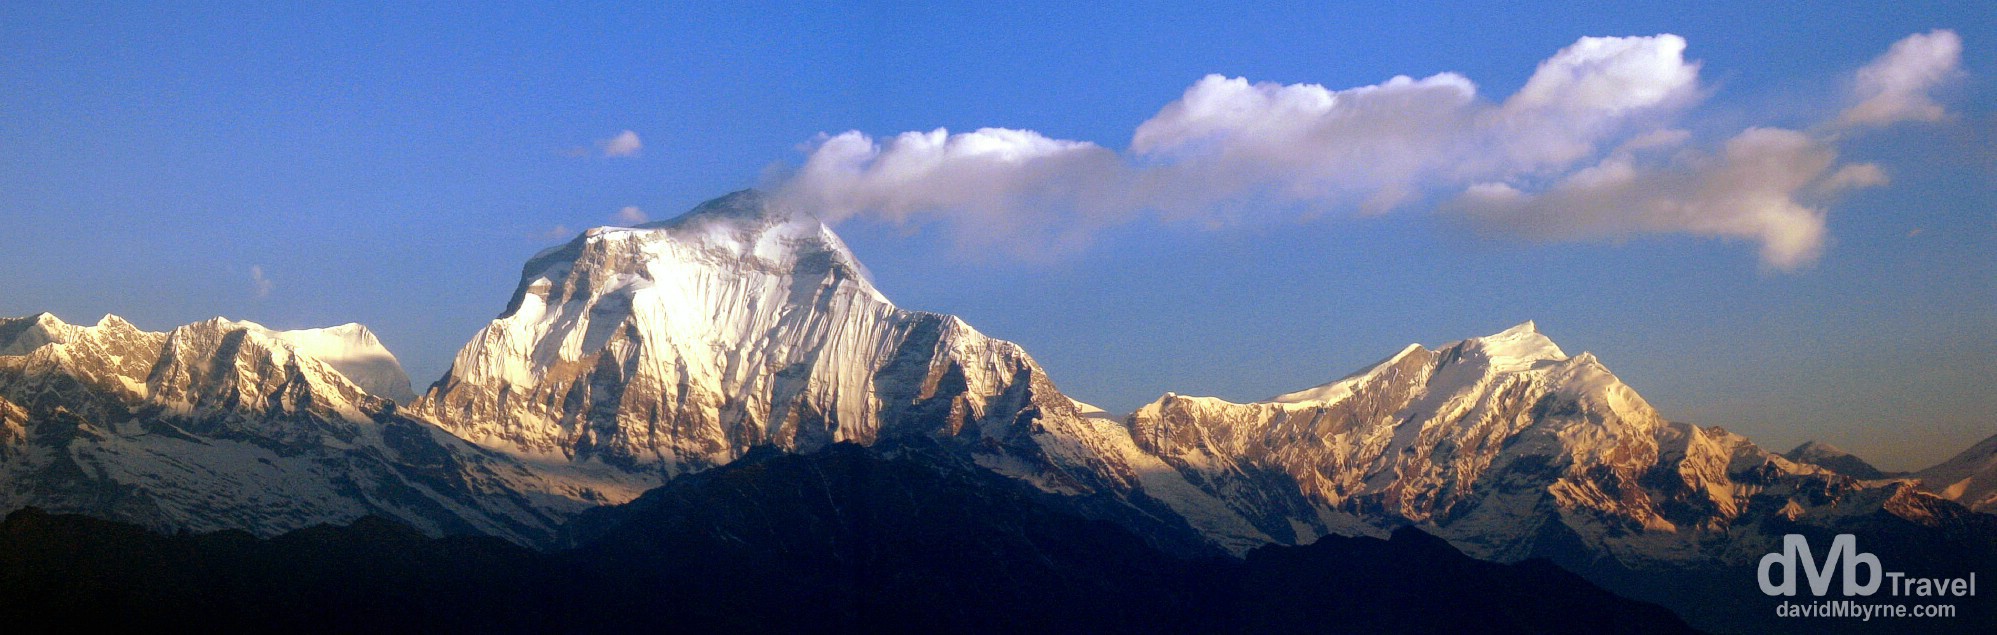 A panoramic picture of early sunrise on the face of Dhaulagiri (8,167 metres / 27,000 ft) as seen from Poon Hill, Annapurna Conservation Area, western Nepal. March 12th, 2008.